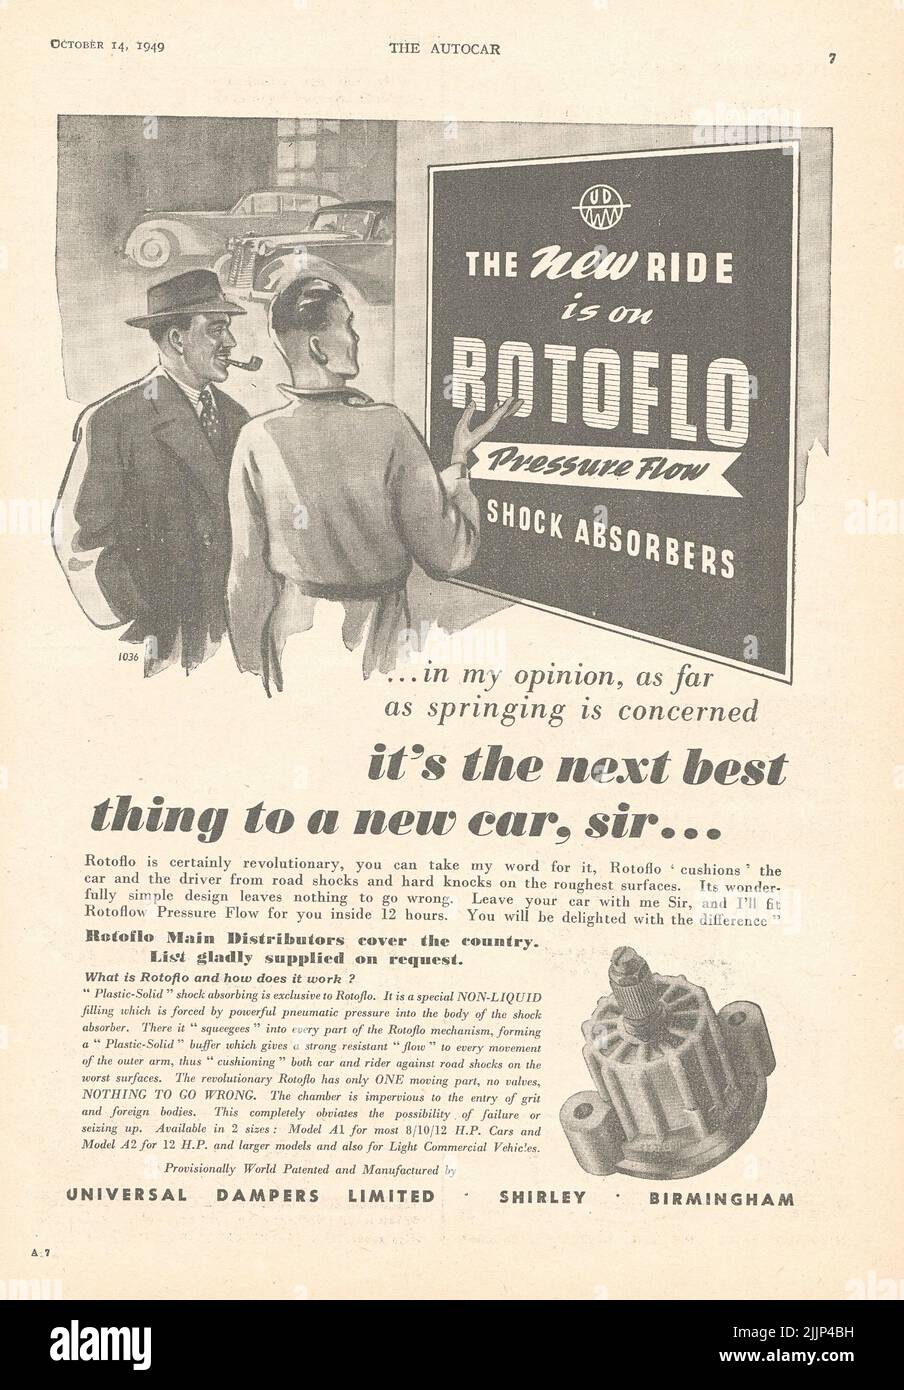 Rotoflo Pressure Flow Shock Absorbers Universal Dampers Limited old vintage advertisement from a UK car magazine Stock Photo